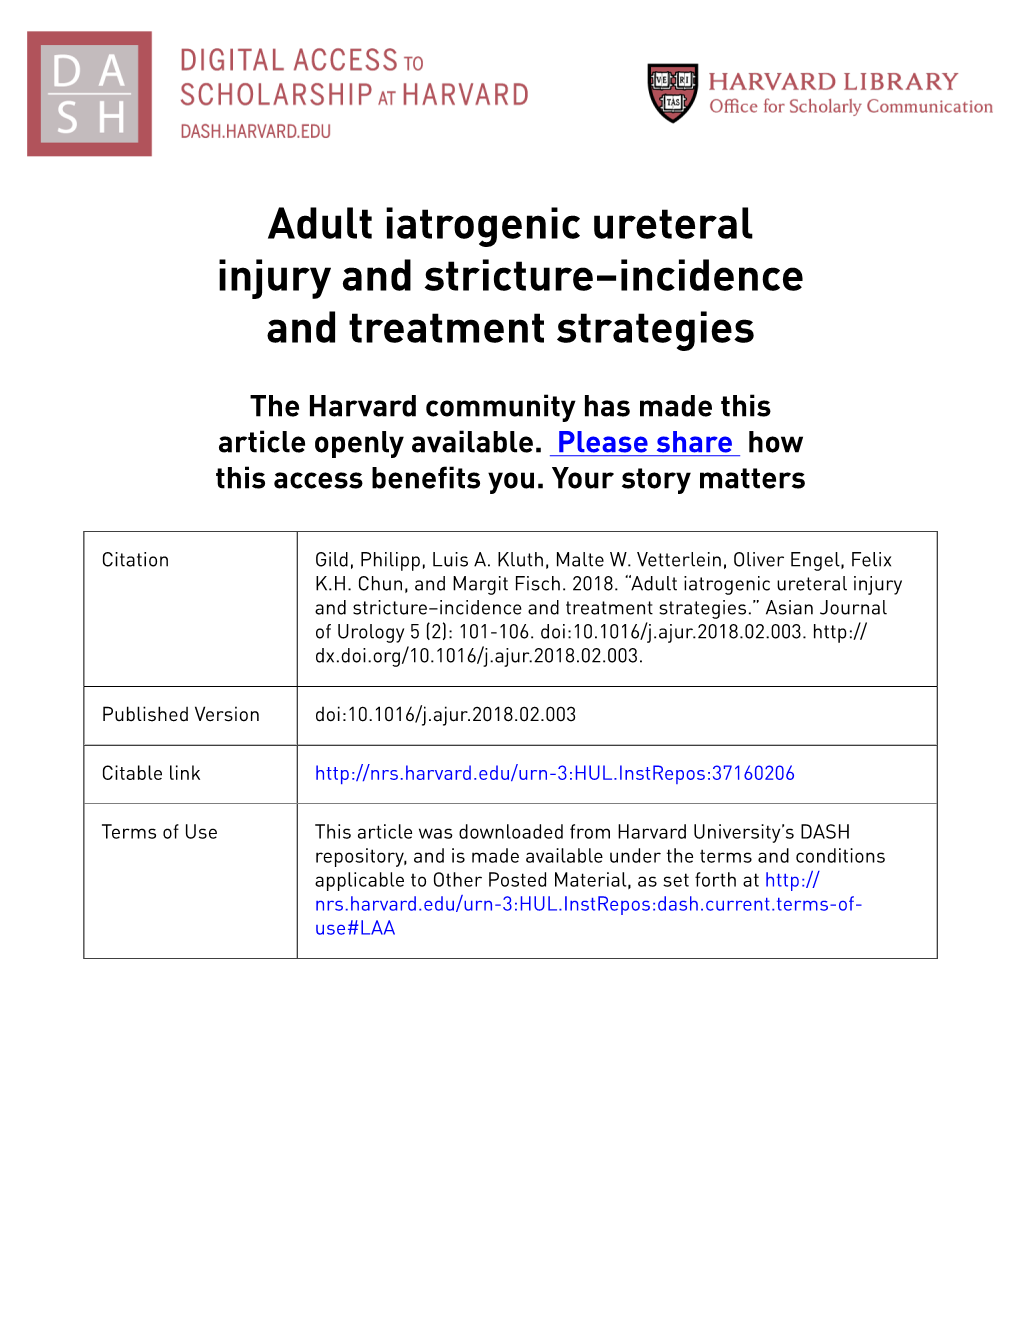 Adult Iatrogenic Ureteral Injury and Stricture-Incidence and Treatment